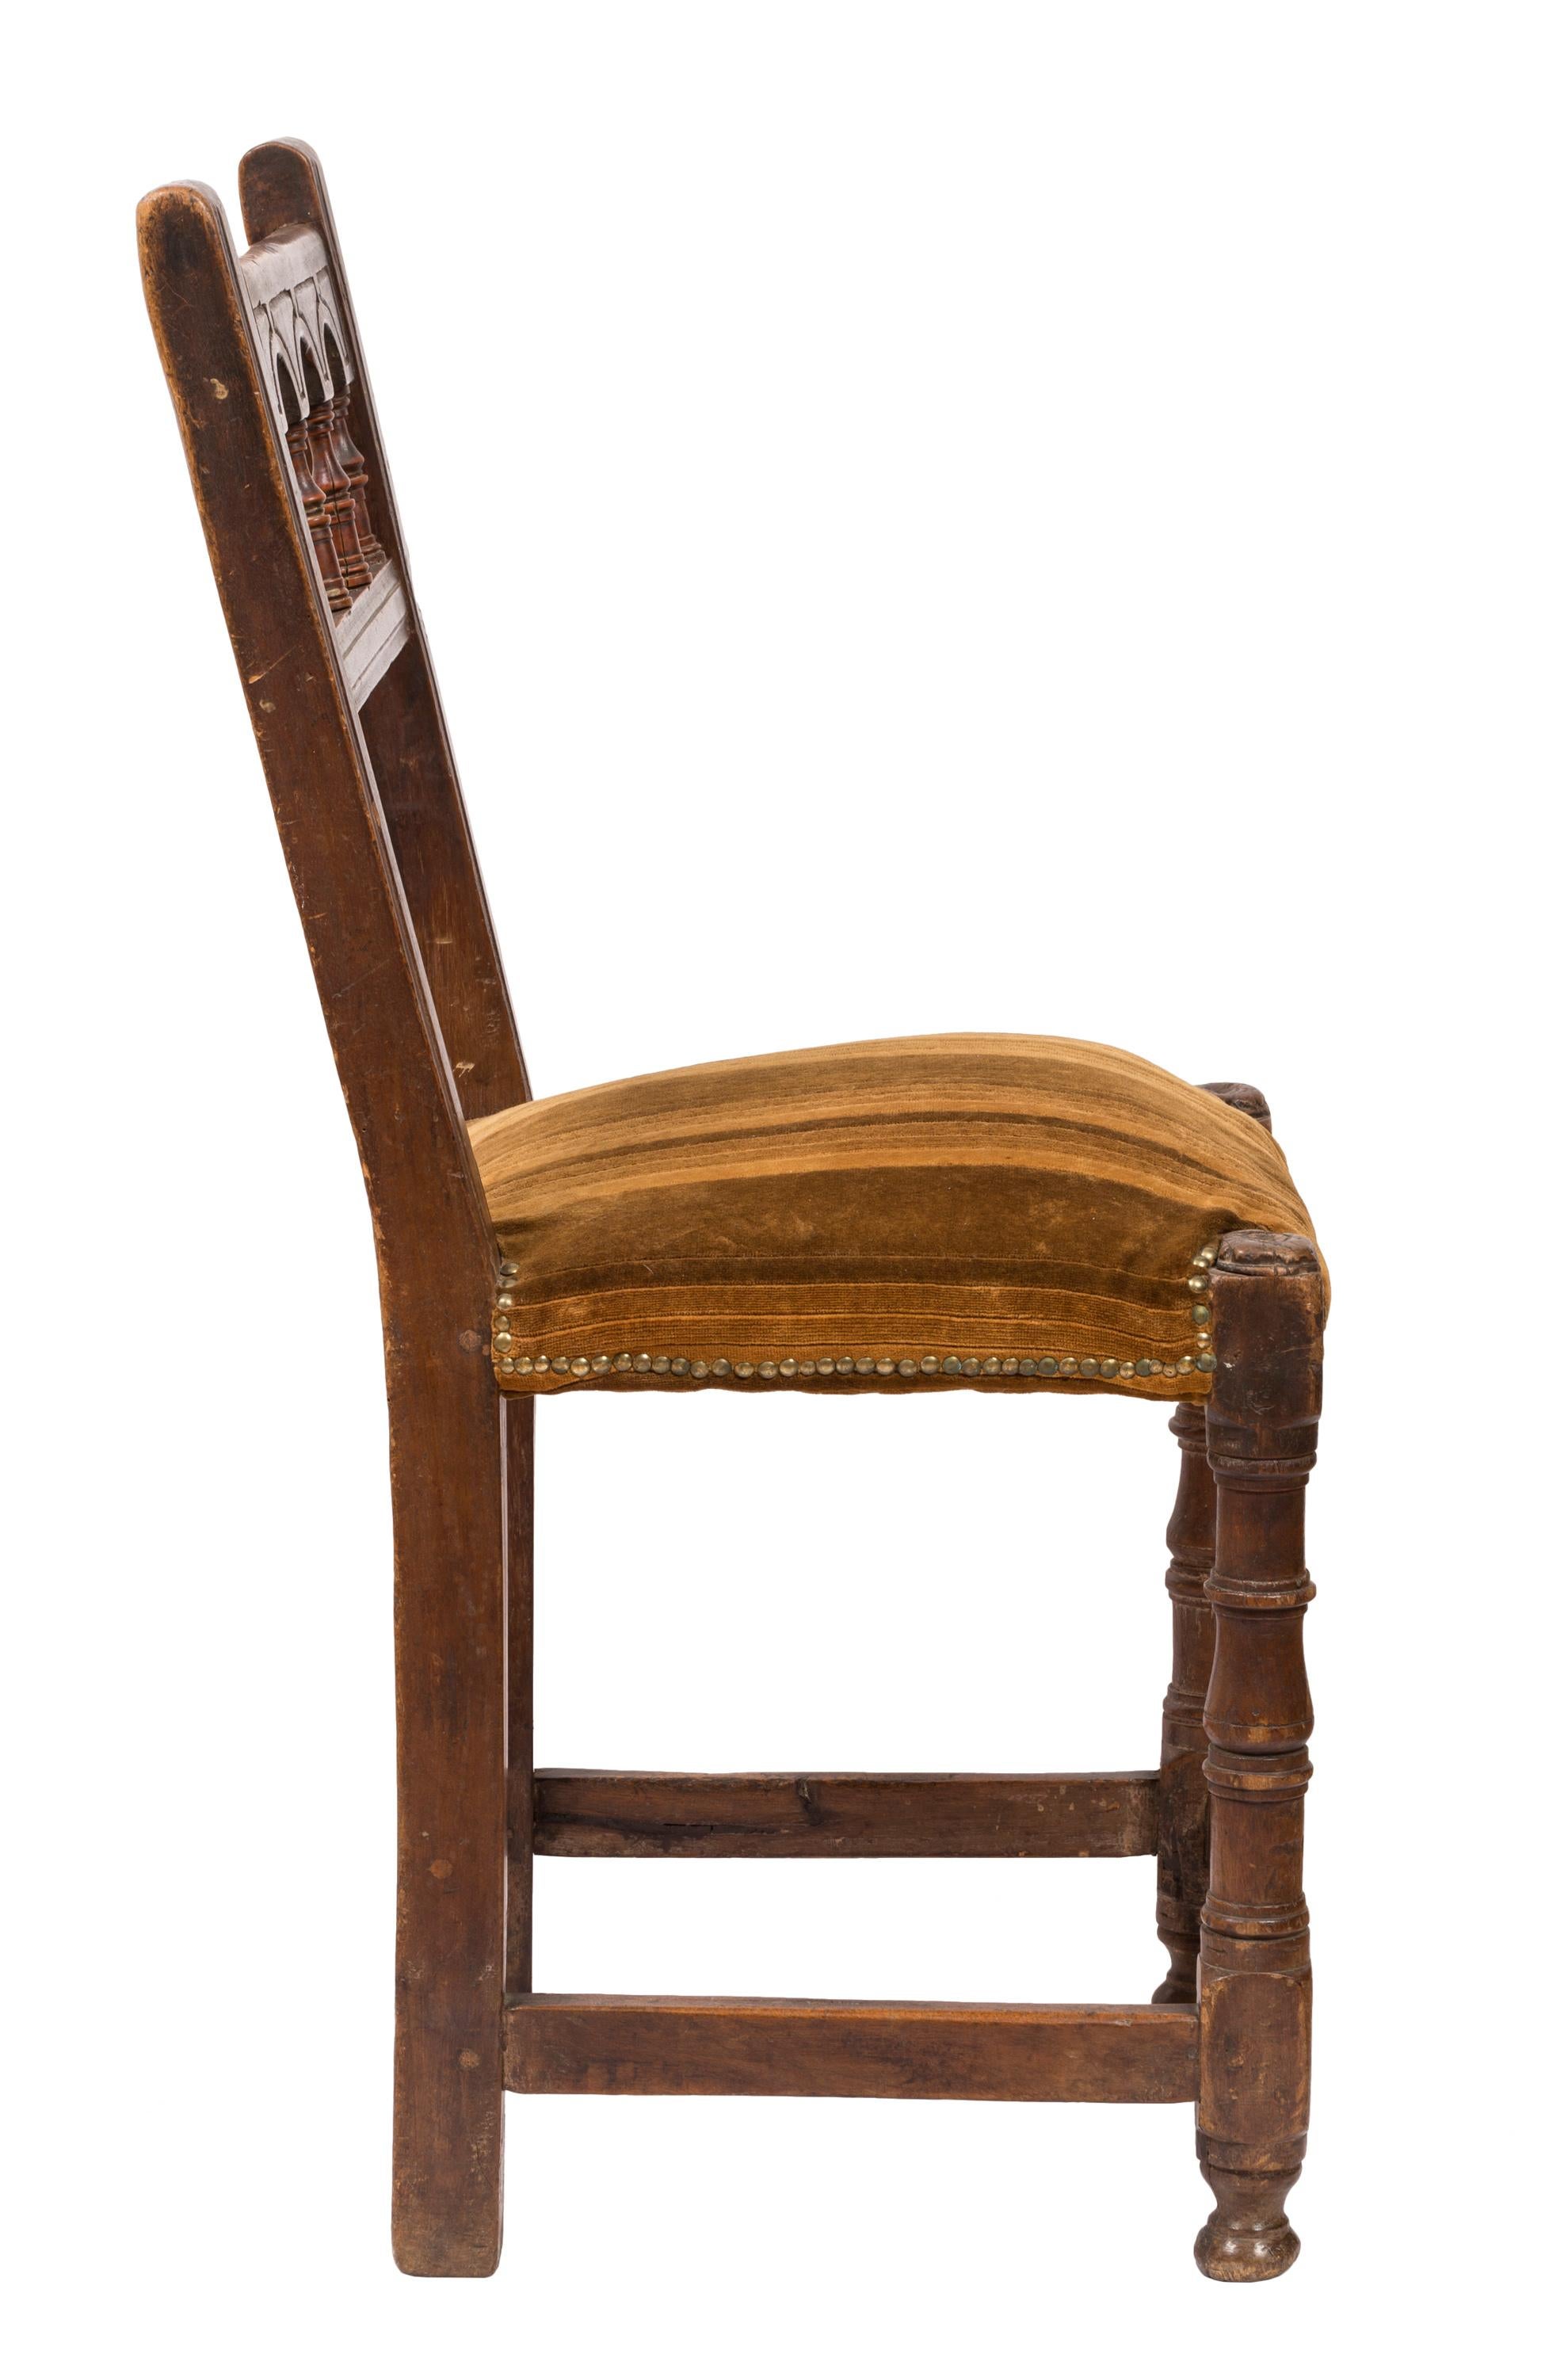 Hand-Carved Set of Antique Handmade, Upholstered Rustic Wood Chairs from Northern Spain For Sale